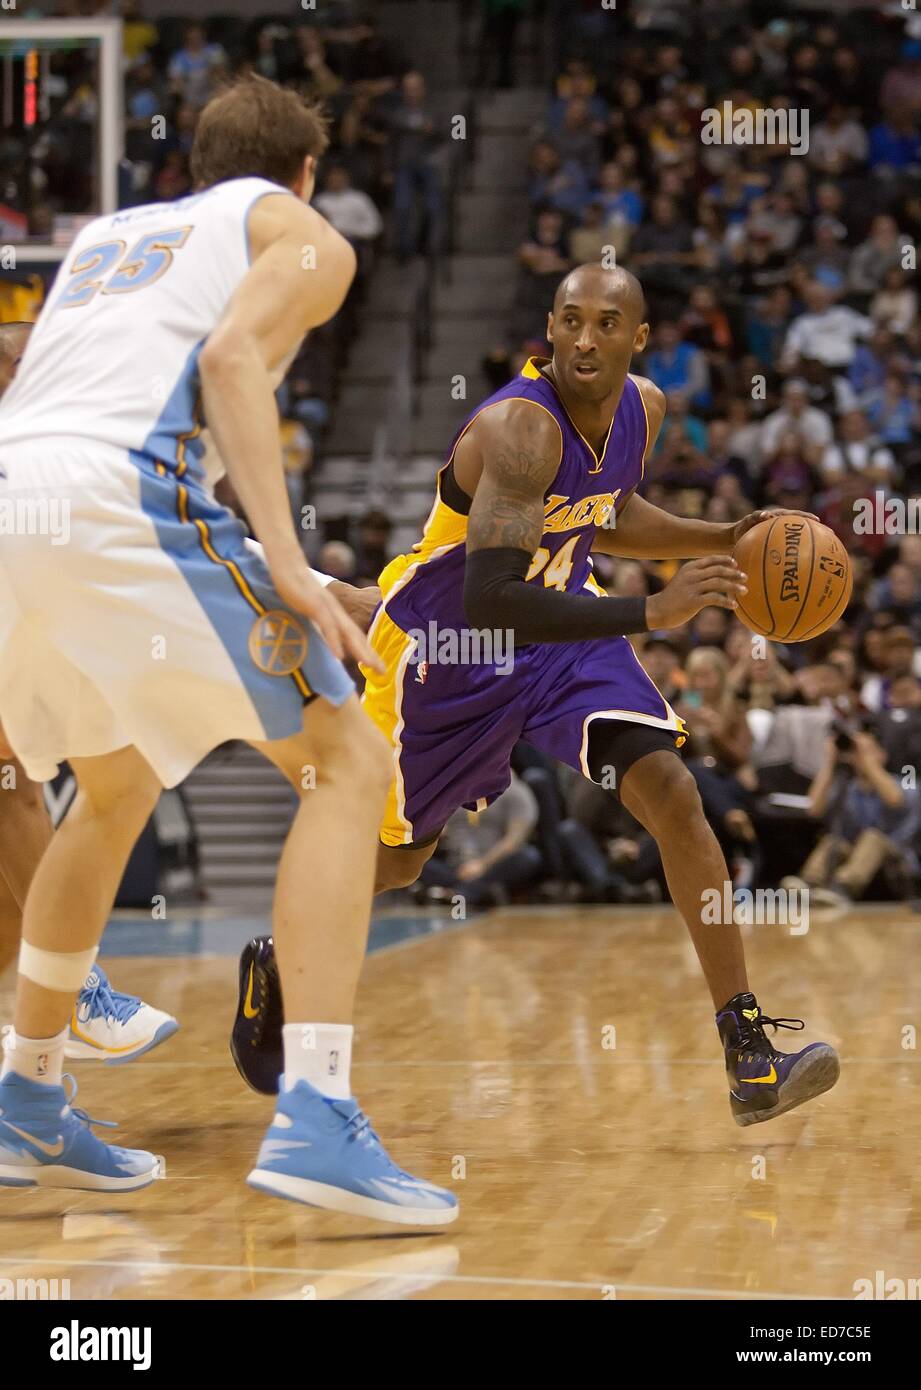 Denver, Colorado, USA. 30th Dec, 2014. Lakers KOBE BRYANT, right, dribbles the ball to center court with Nuggets TIMOFEY MOZGOV, left, guarding him during the 3rd. Quarter at the Pepsi Center Tues. night. The Lakers beat the Nuggets 111-103 Credit:  Hector Acevedo/ZUMA Wire/Alamy Live News Stock Photo